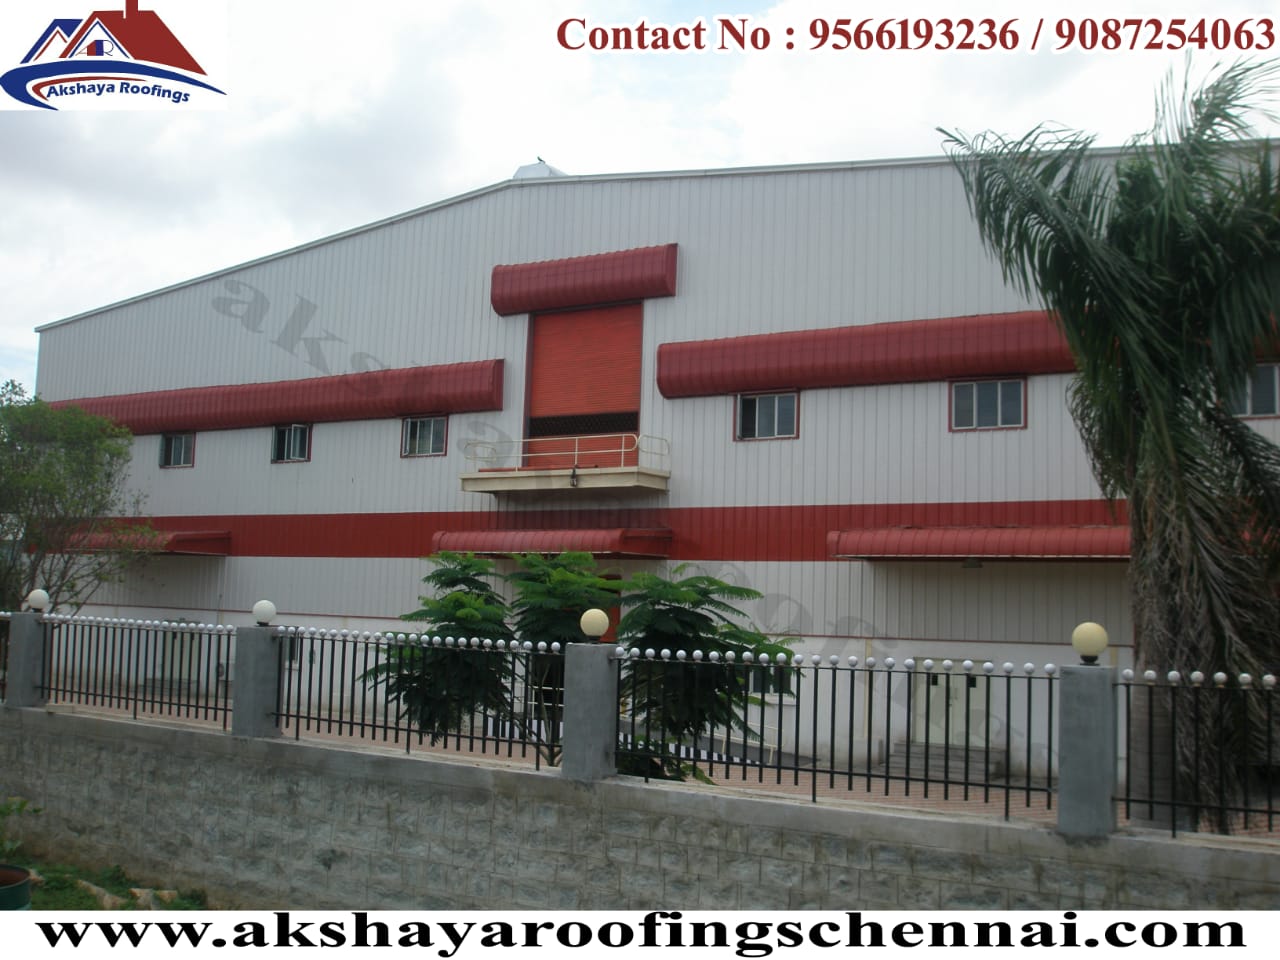 School Colleges Roofing Shed Contractors in Chennai, Tamil Nadu